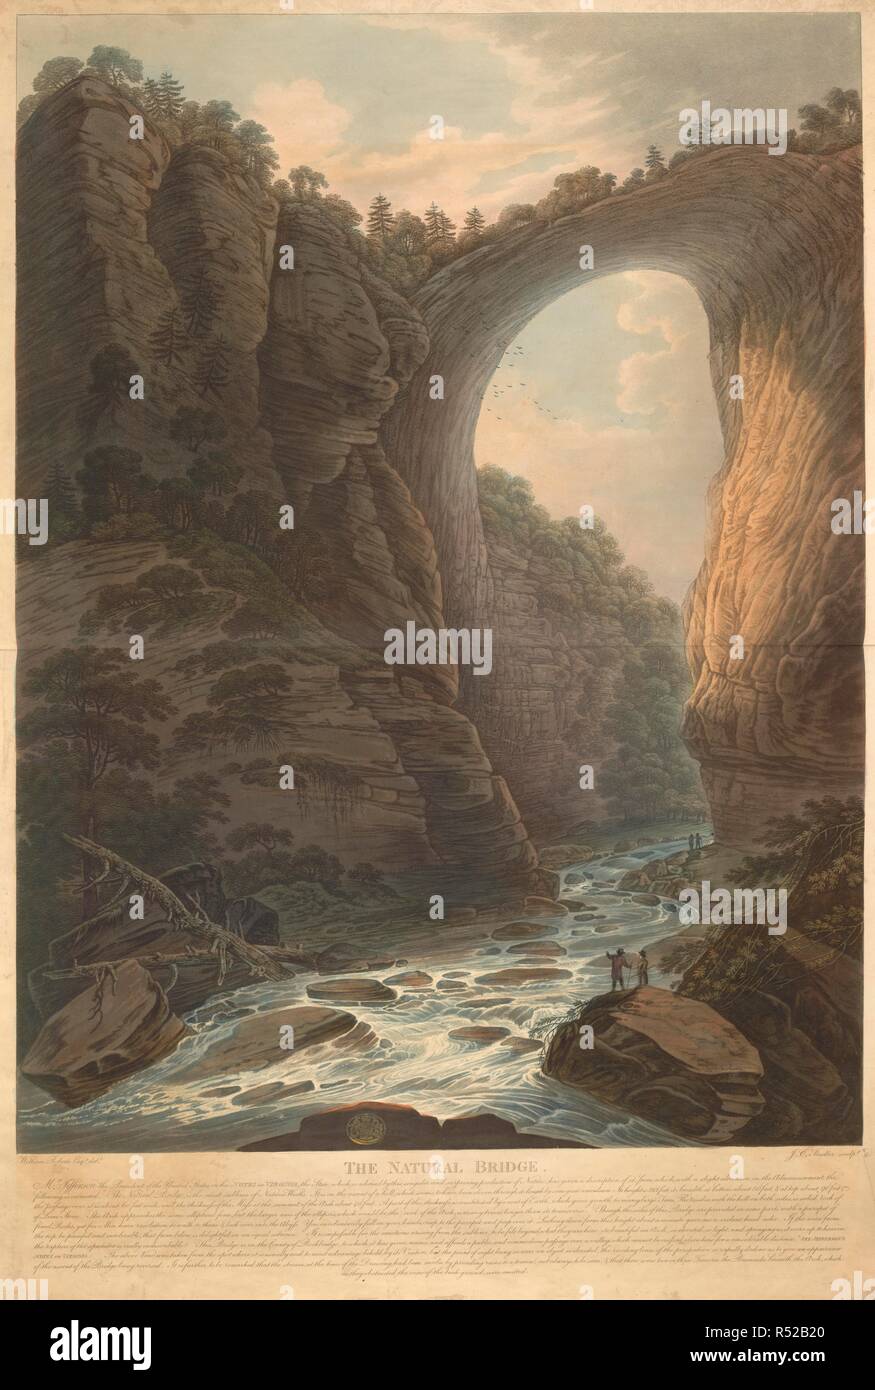 A view in Rockbridge County, crossing Cedar Creek, in Virginia, with two figures standing on the banks of a river admiring a high arch of natural rock through which a turbulent current runs among the rocks, with trees above and a valley seen in the background. THE NATURAL BRIDGE. [London] : Pub.d as the Act Directs By Messrs. Colnaghi & Co. Cockspur Street, [1808]. Hand-coloured aquatint and etching. Source: Maps K.Top.122.48. Language: English. Author: Stadler, Joseph C. Stock Photo